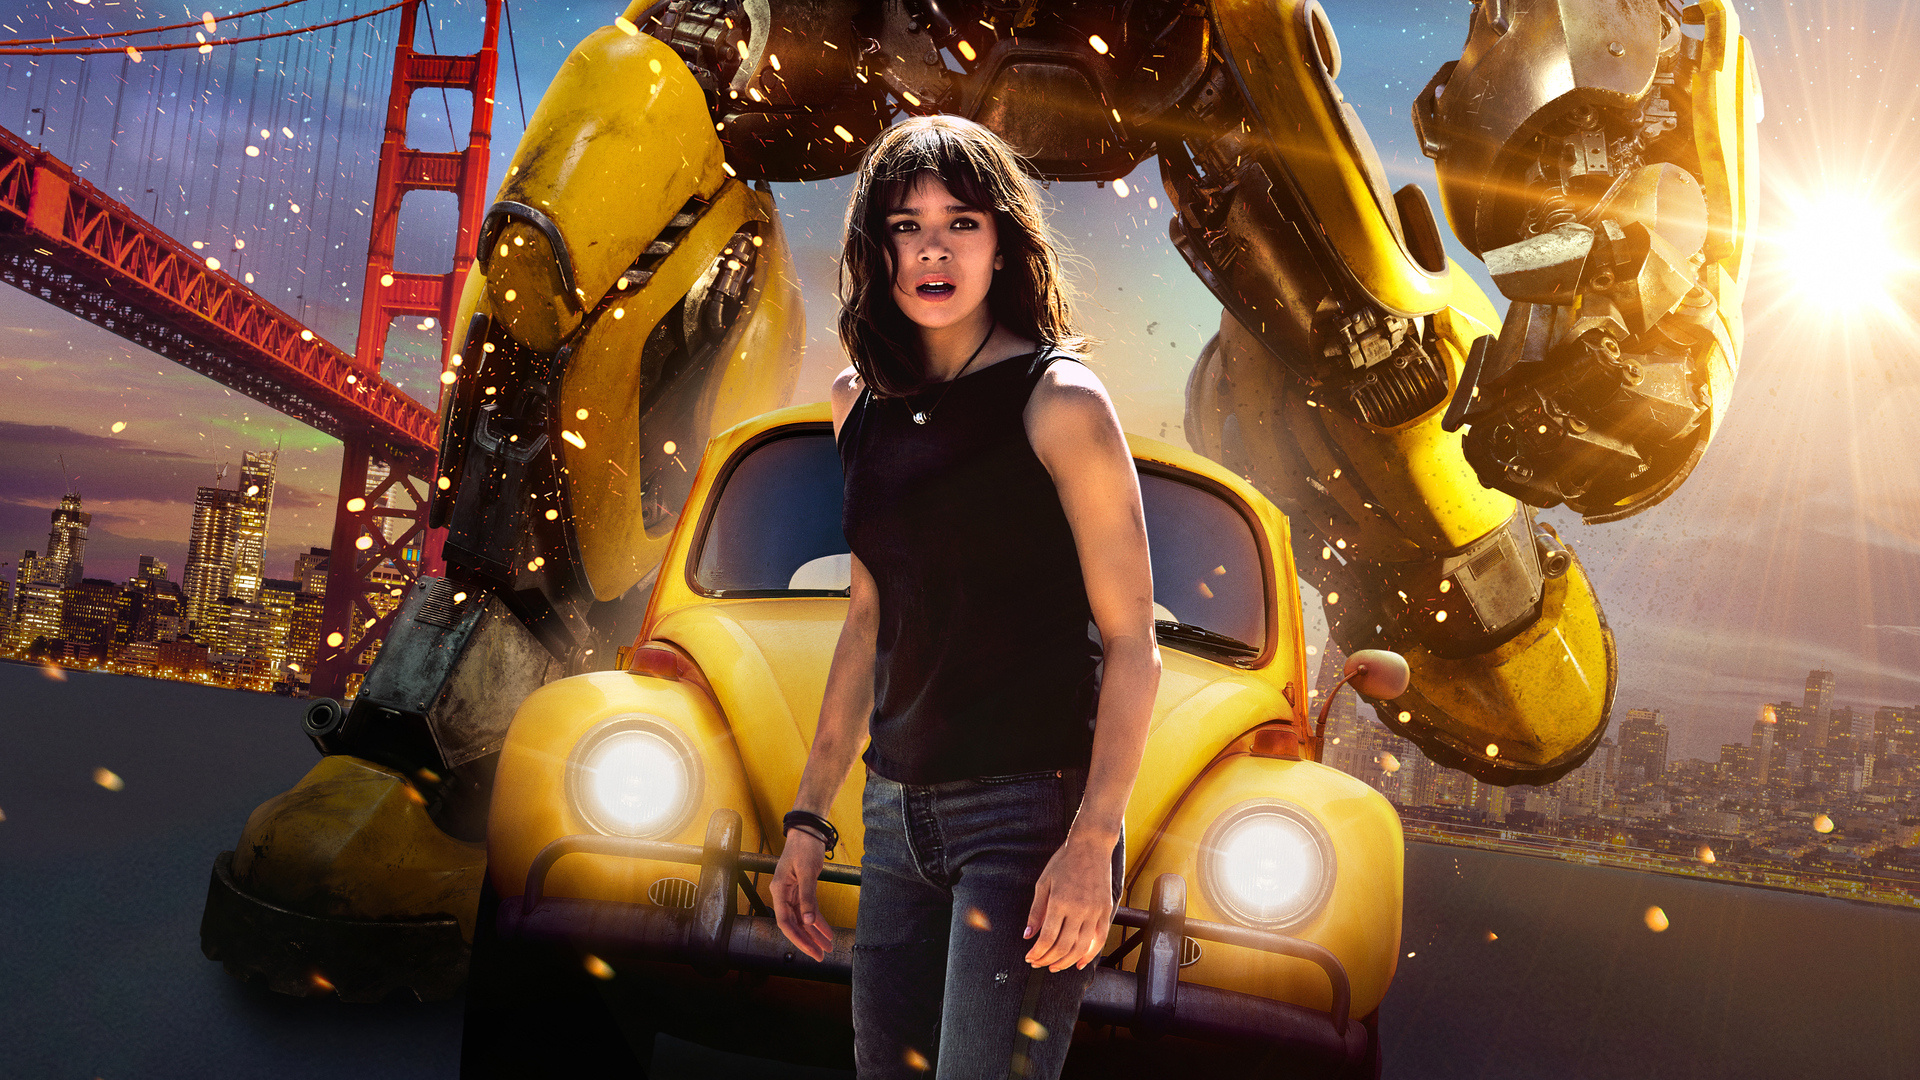 Hailee Steinfeld in BumbleBee movie, Vibrant and action-packed, Laptop wallpaper, Movie poster, 1920x1080 Full HD Desktop